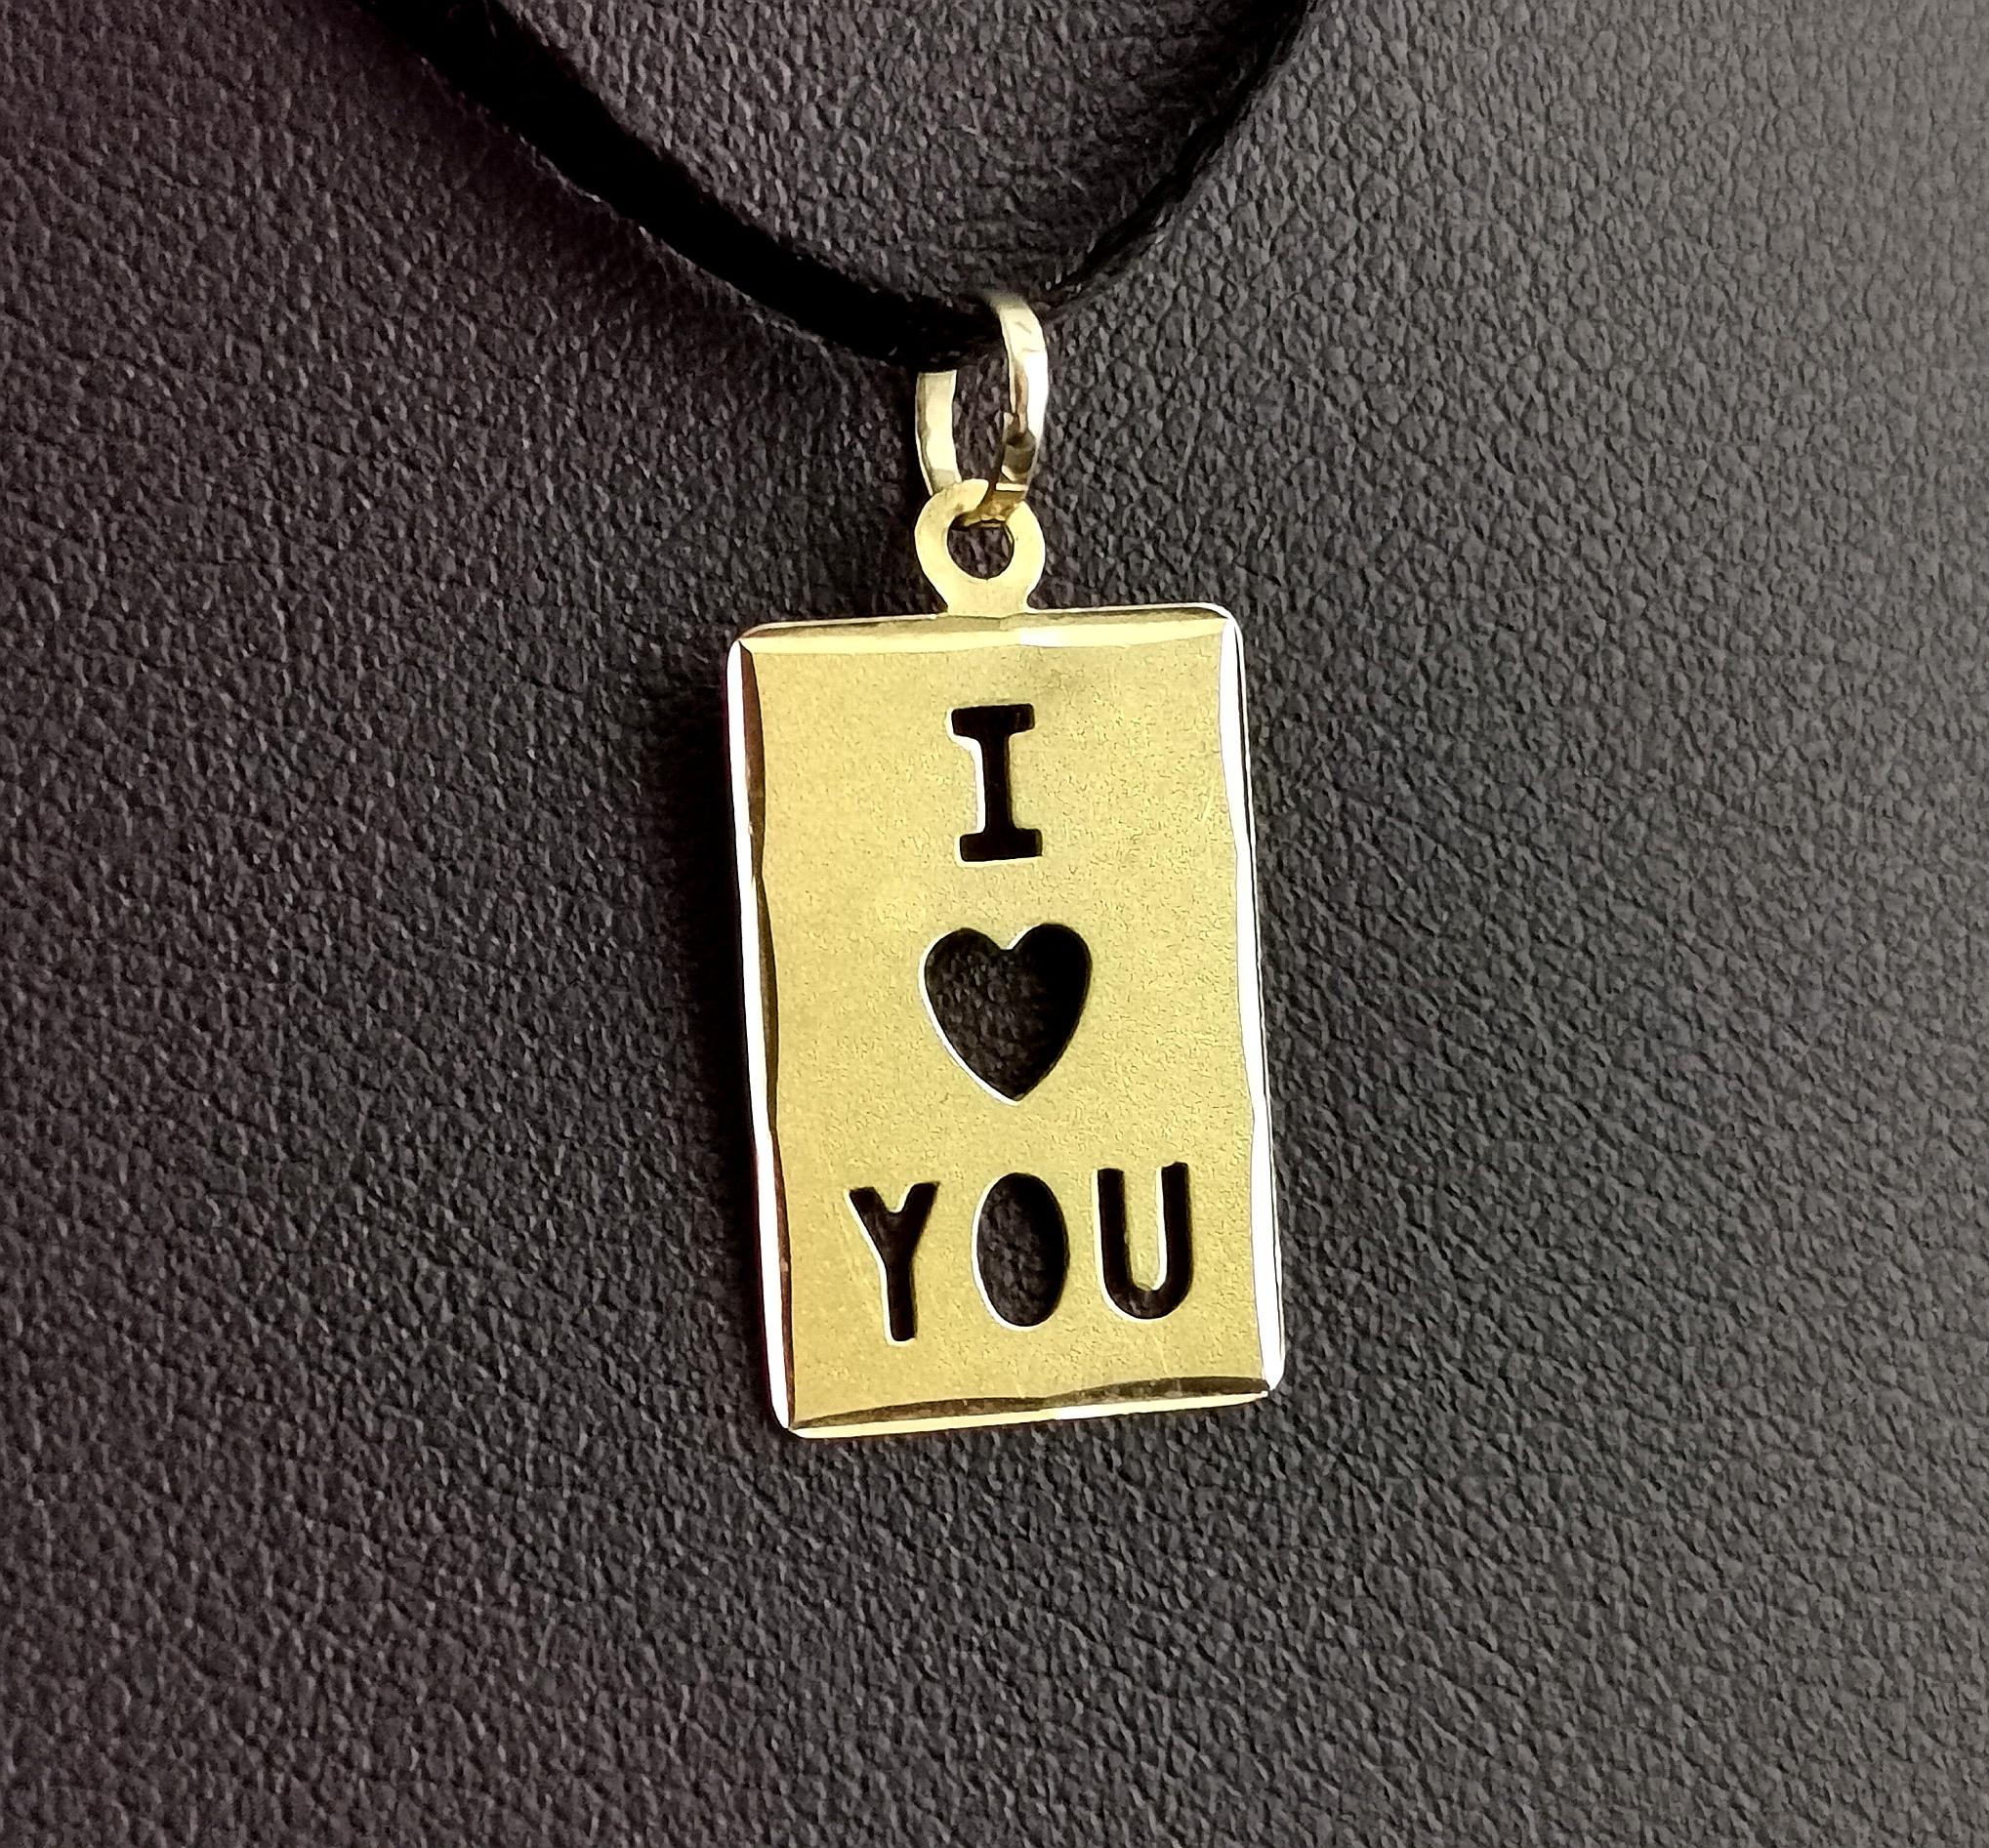 A sweet and dainty vintage 18ct gold I love you pendant or charm.

A slim card shaped rectangular pendant with cut out detailing with I a love heart and you.

What better way to say I love you in a piece of jewellery than literally I love you!

It